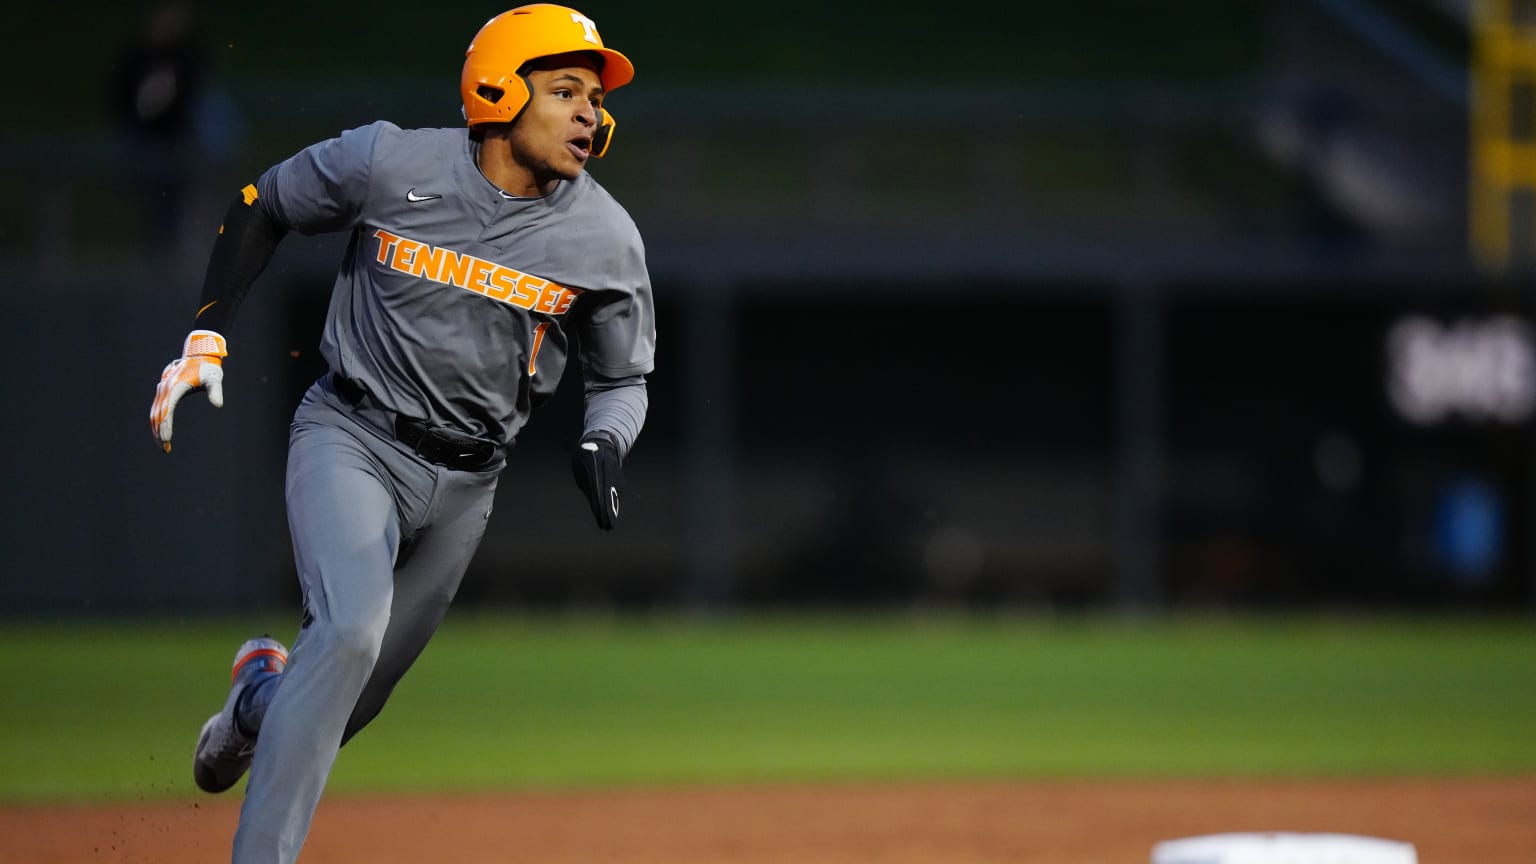 Tennessee's Christian Moore running the bases